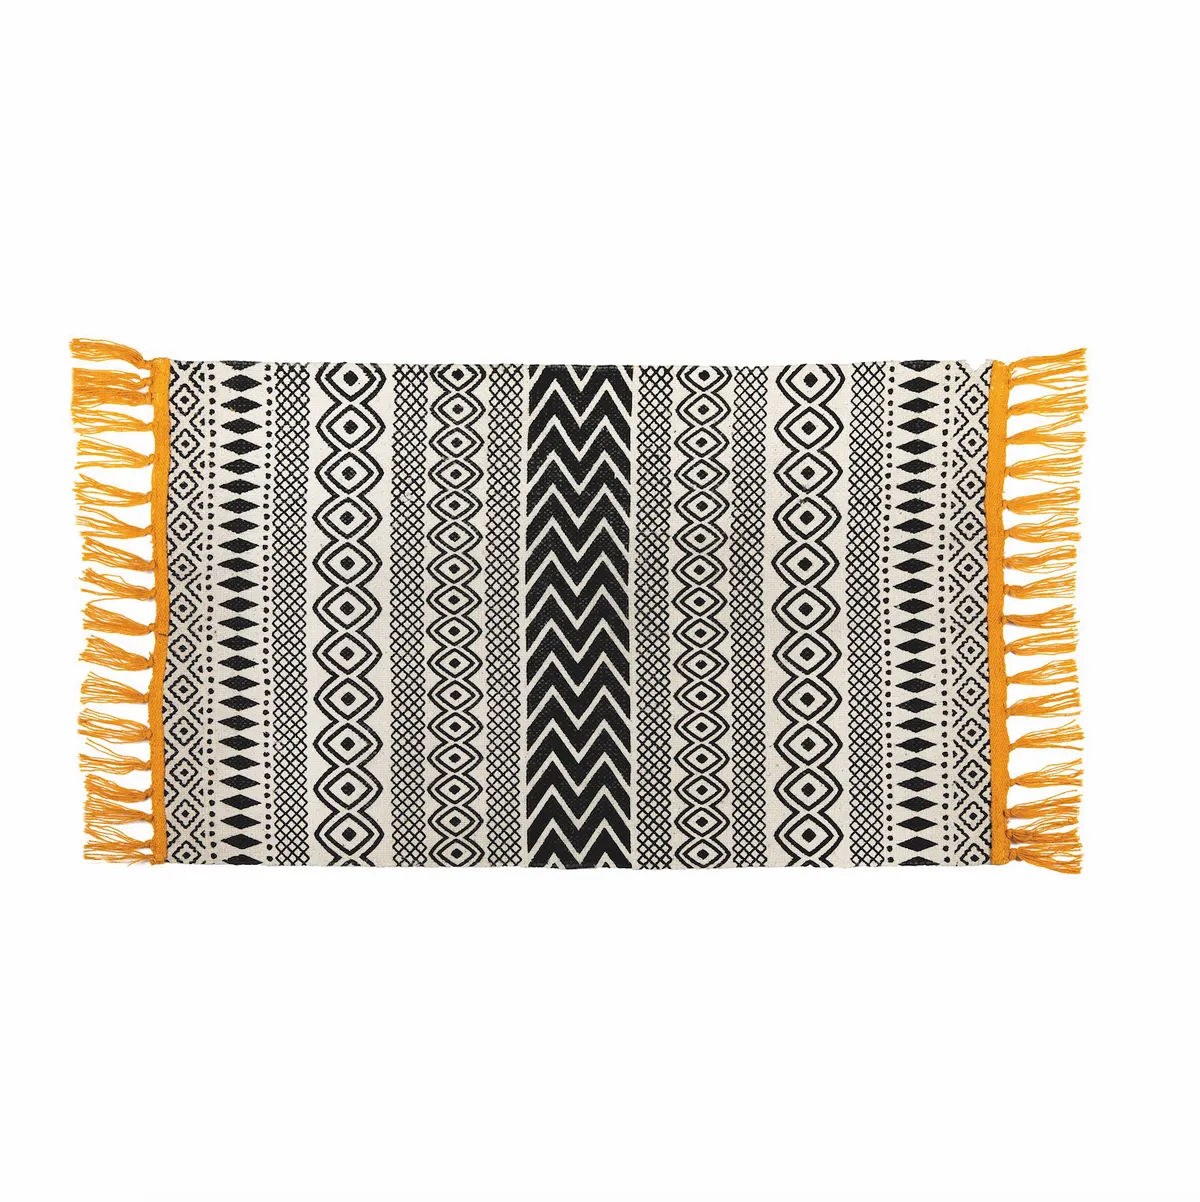 Bring a flash of colour to a monochrome scheme with this Scandi-Boho Geo rug. £25 from Albert & Moo